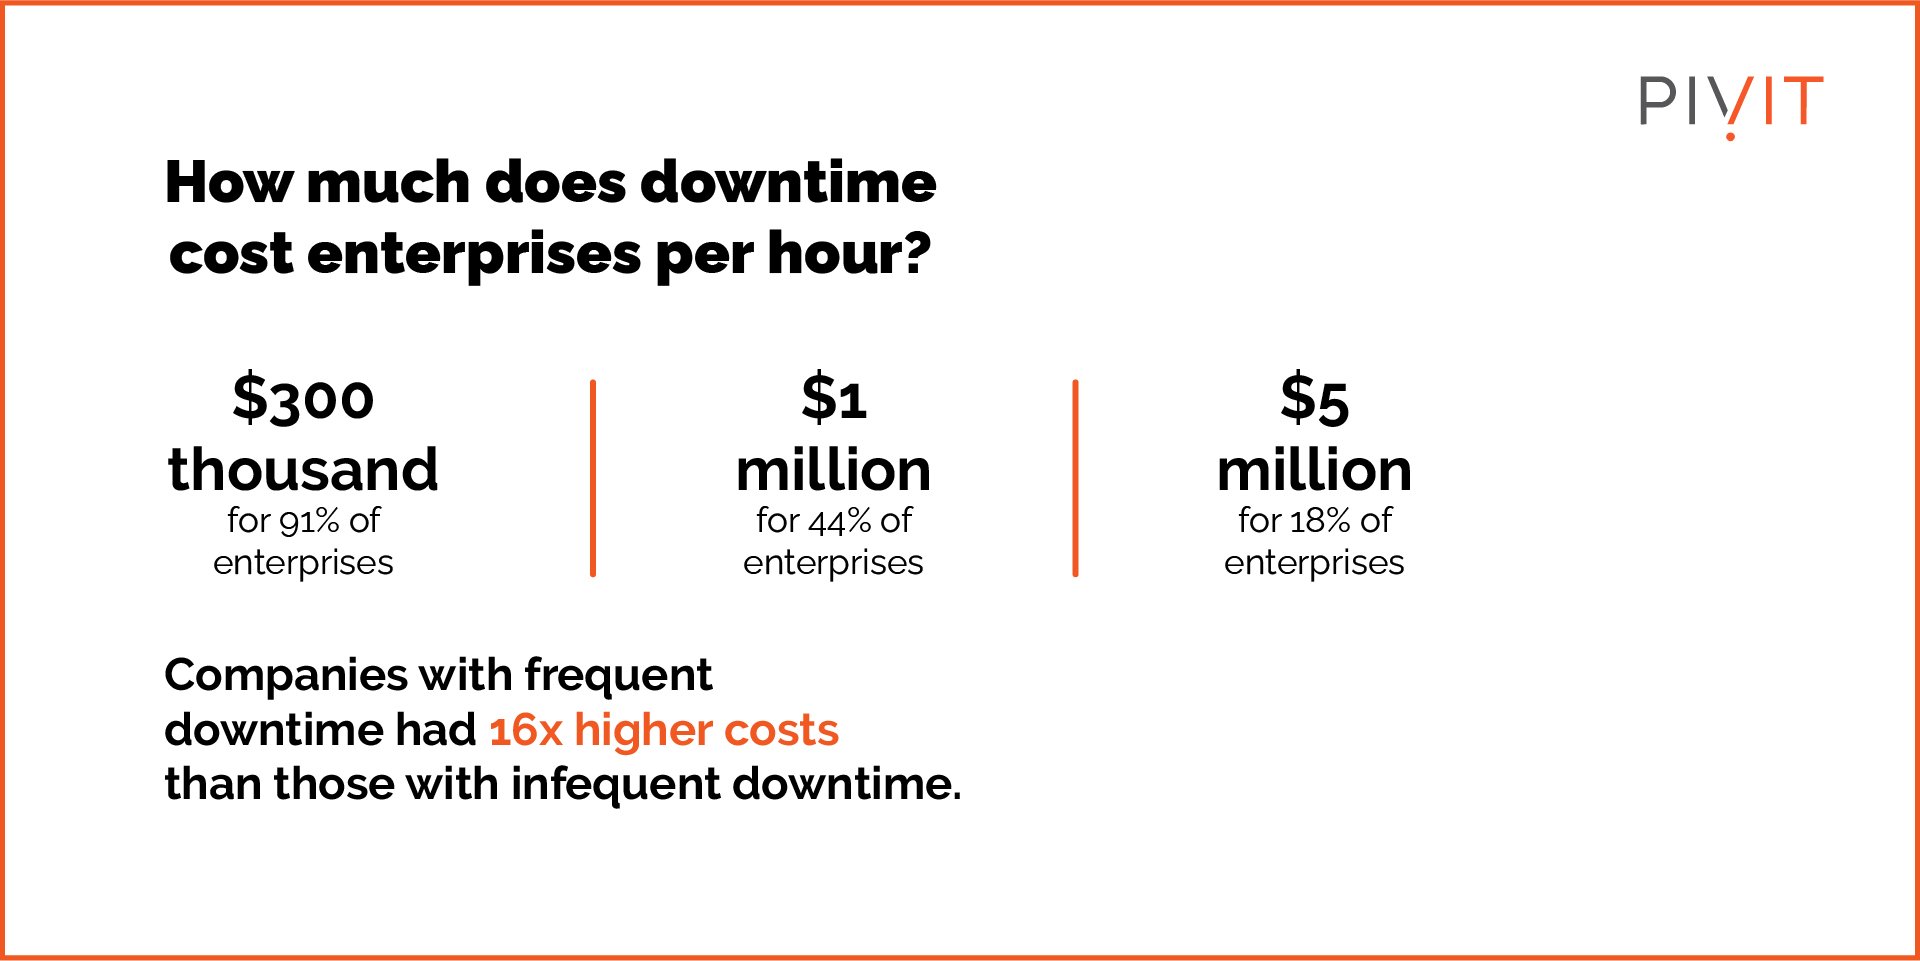 Figures displaying the cost of enterprise downtime per hour